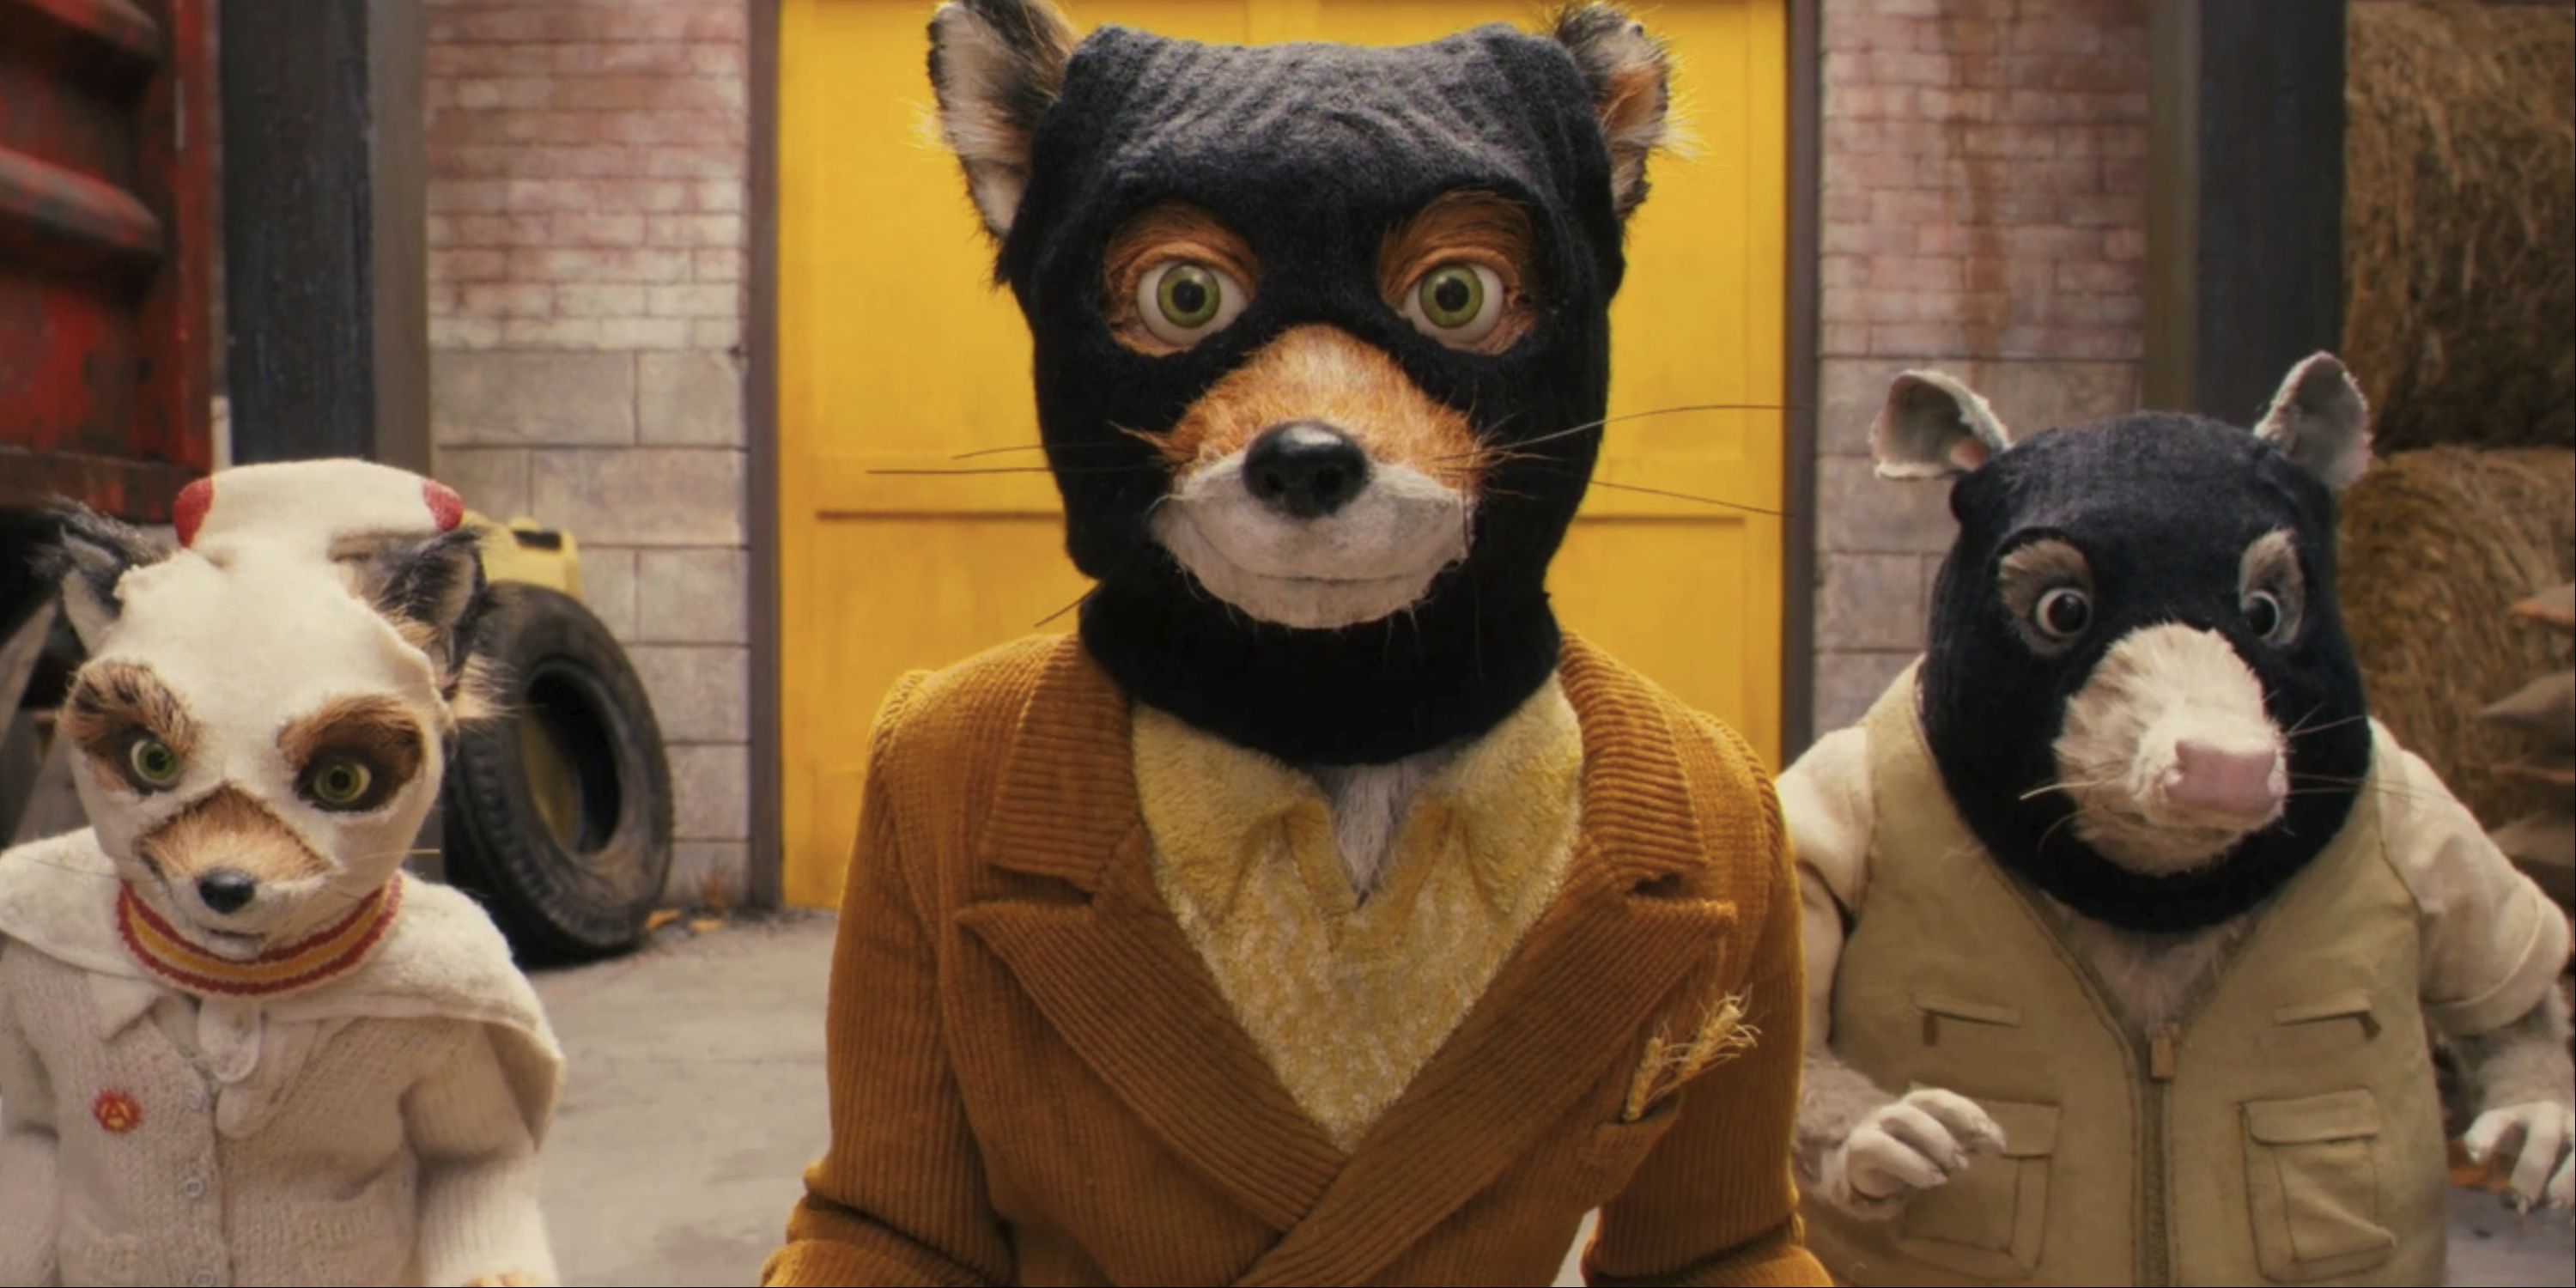 Mr. Fox, Ash, and Kylie wearing ski masks about to rob the farm in Fantastic Mr. Fox